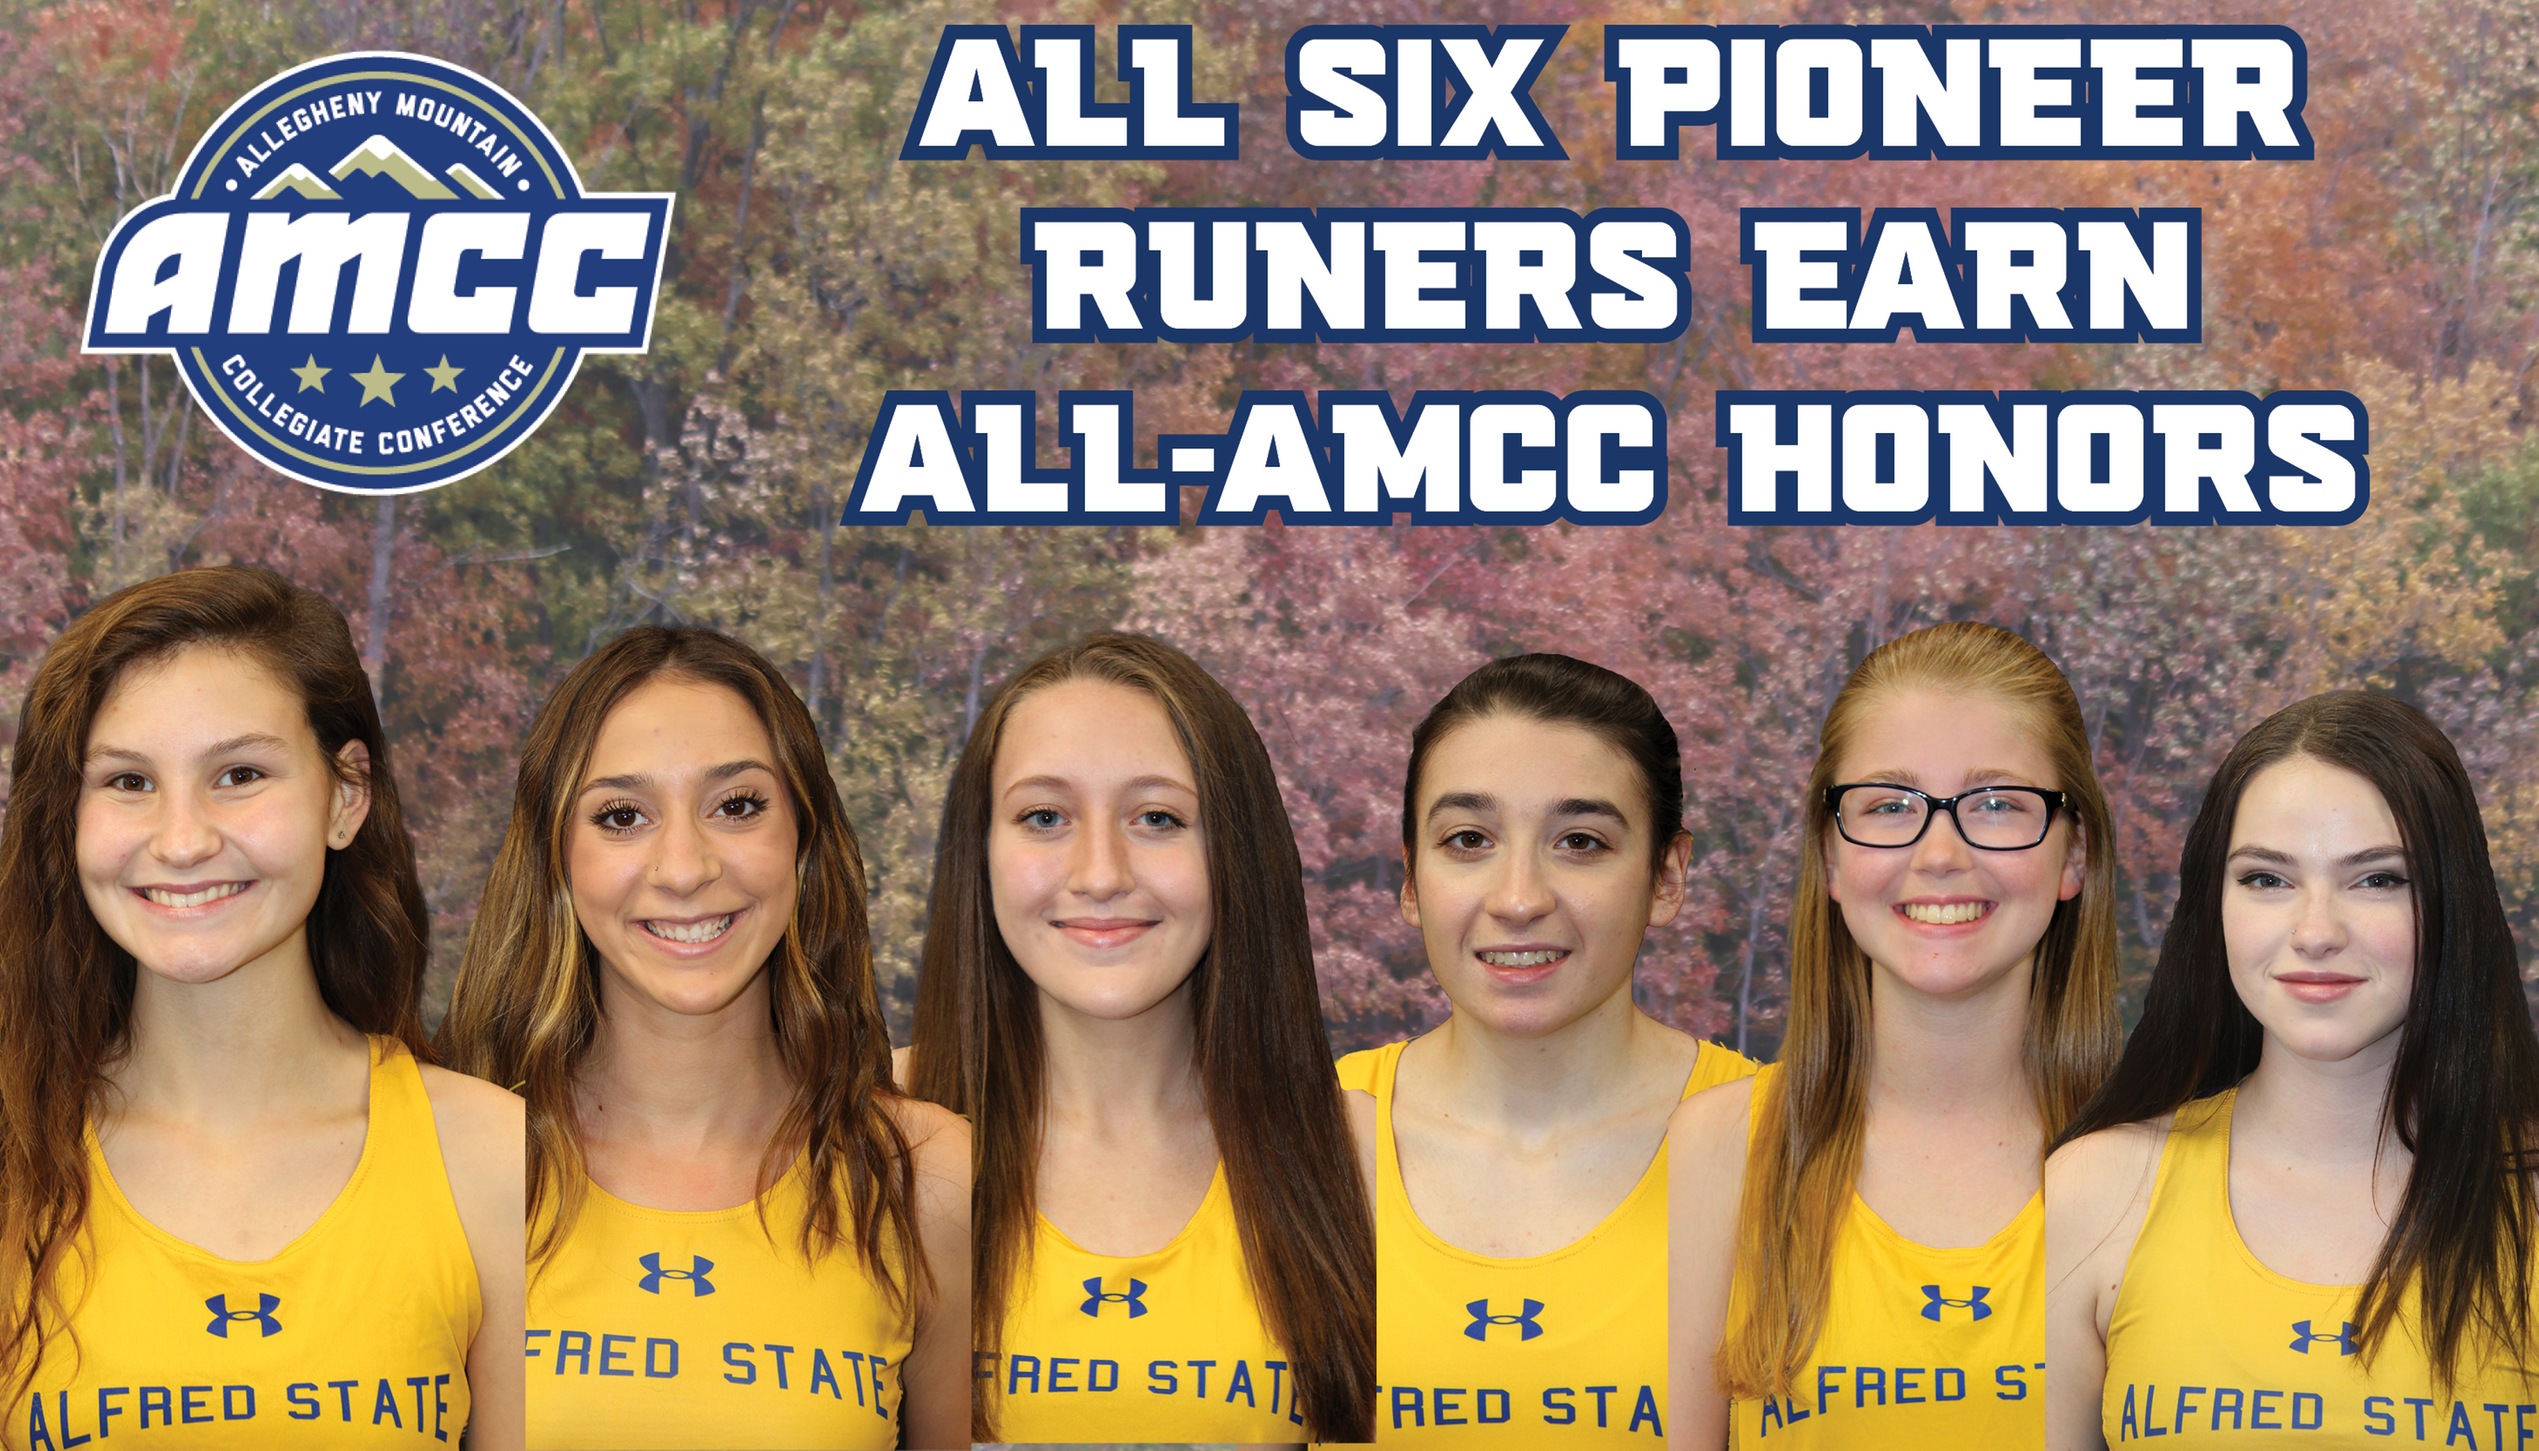 Six female cross country athletes (pictured) earned All-AMCC honors